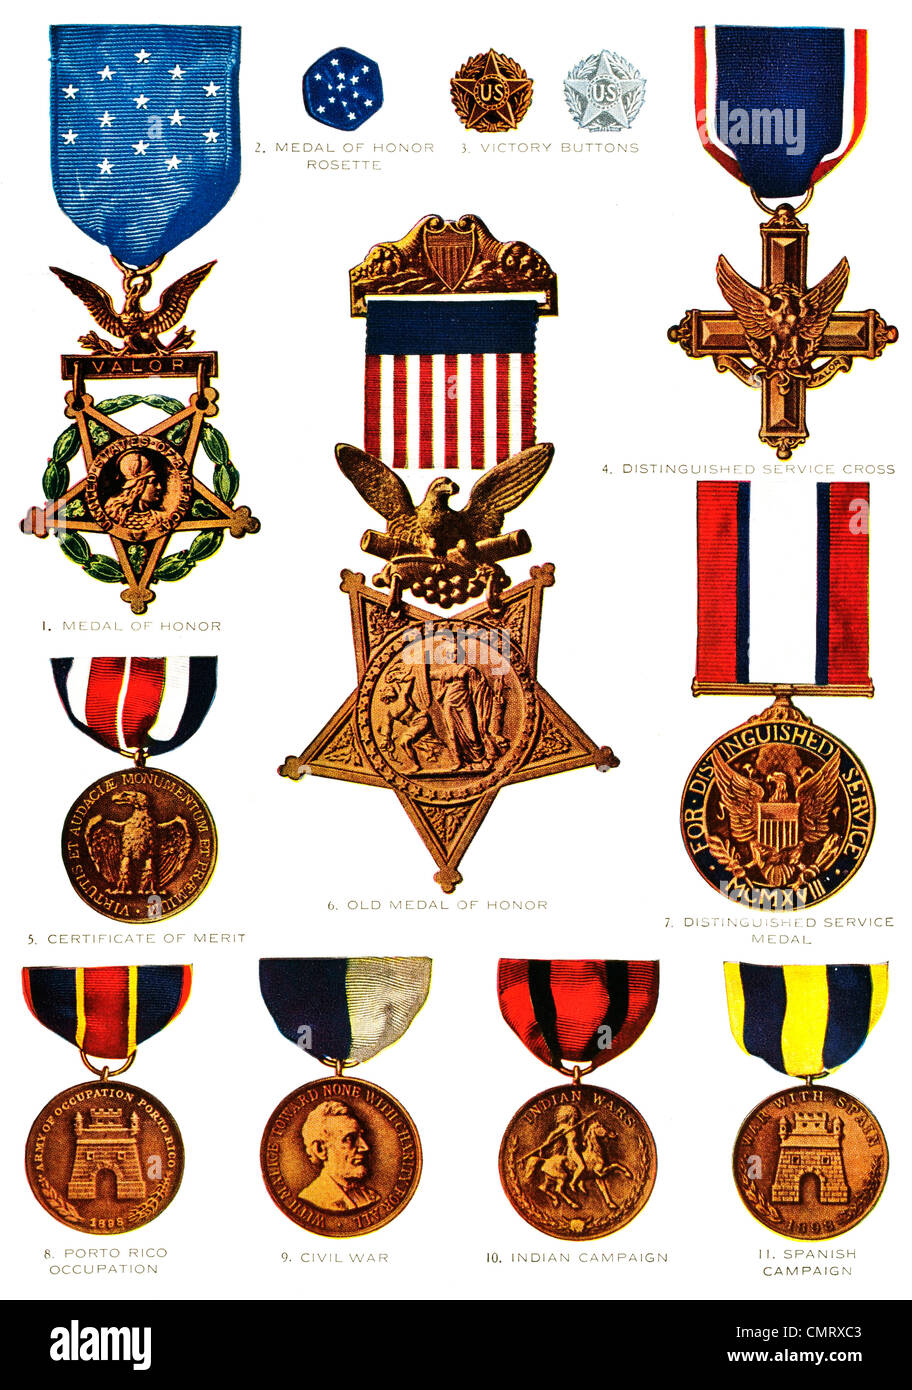 1919 Medals of Merit and Service United States Army Military Stock Photo